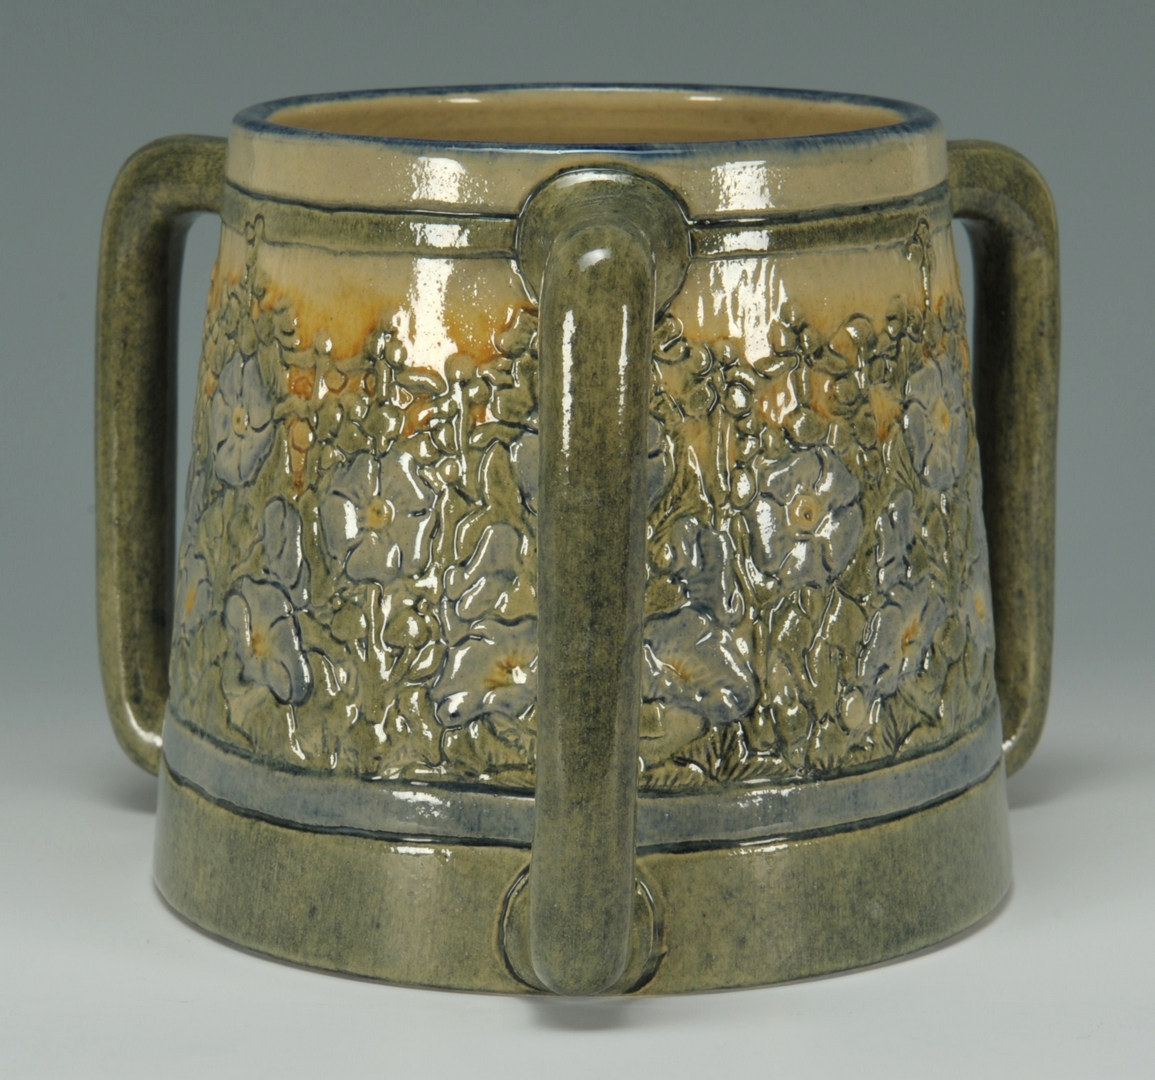 Lot 129: Newcomb Art Pottery Loving Cup by Leona Nicholson